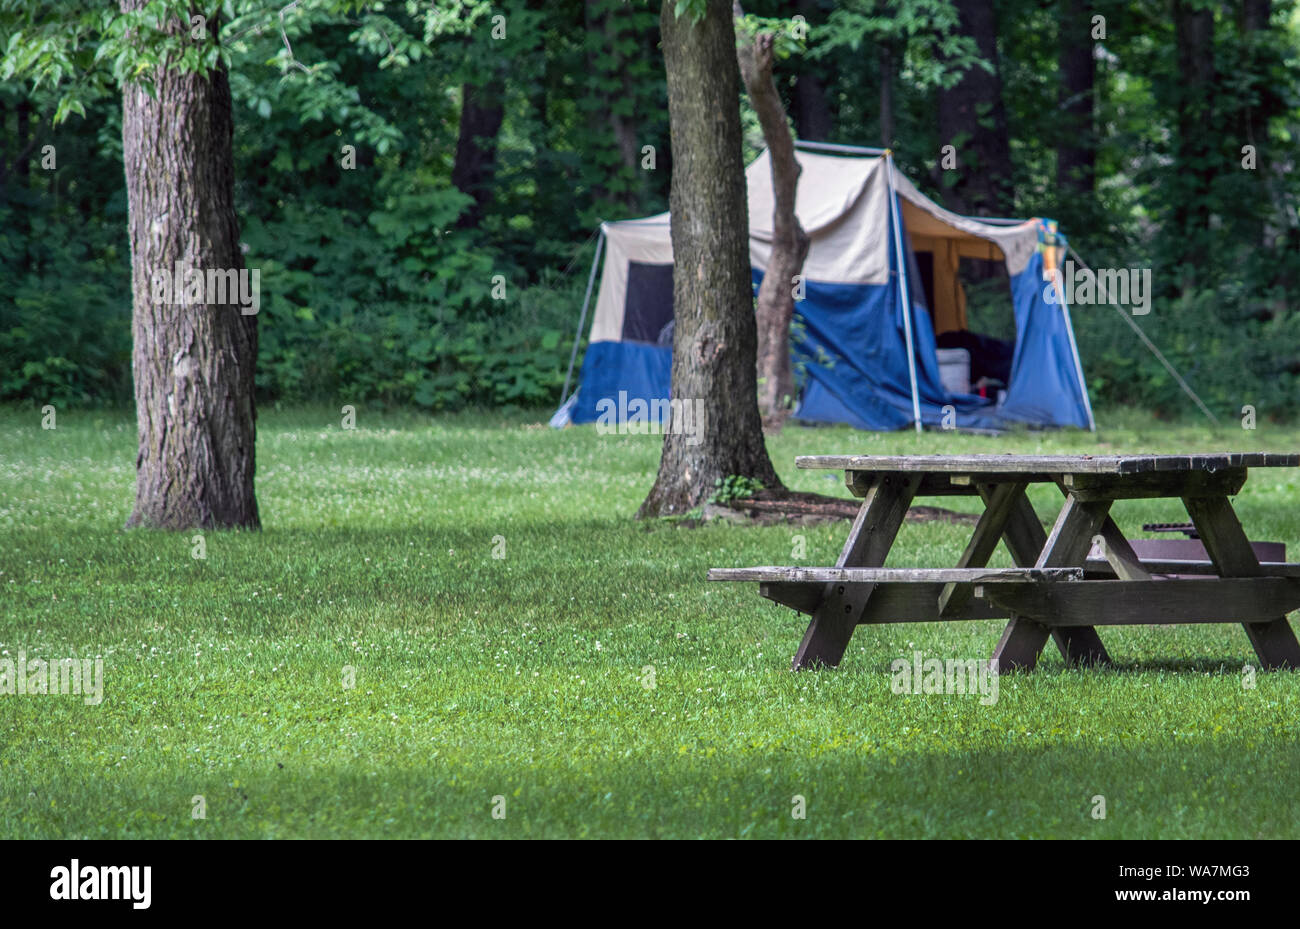 A tent is set up in an Indiana state park, near a picnic table and a grove of trees Stock Photo